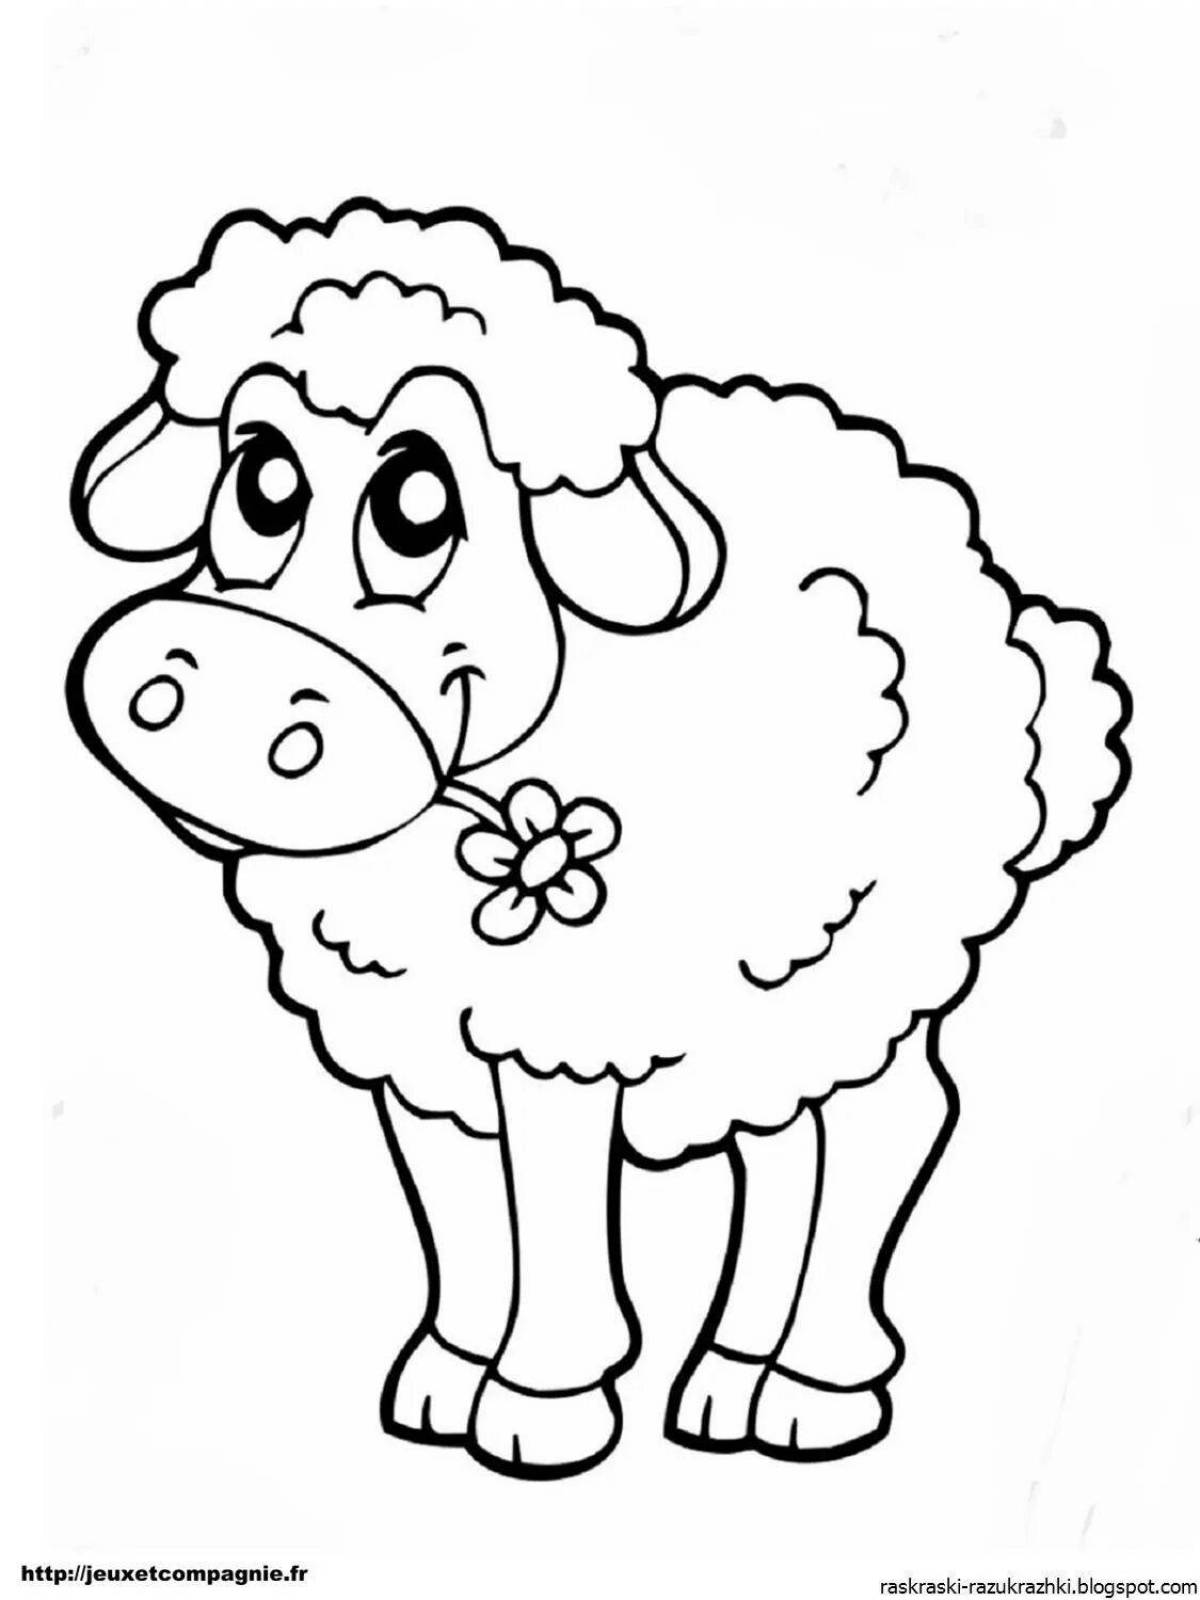 Coloring cute sheep for children 5-6 years old